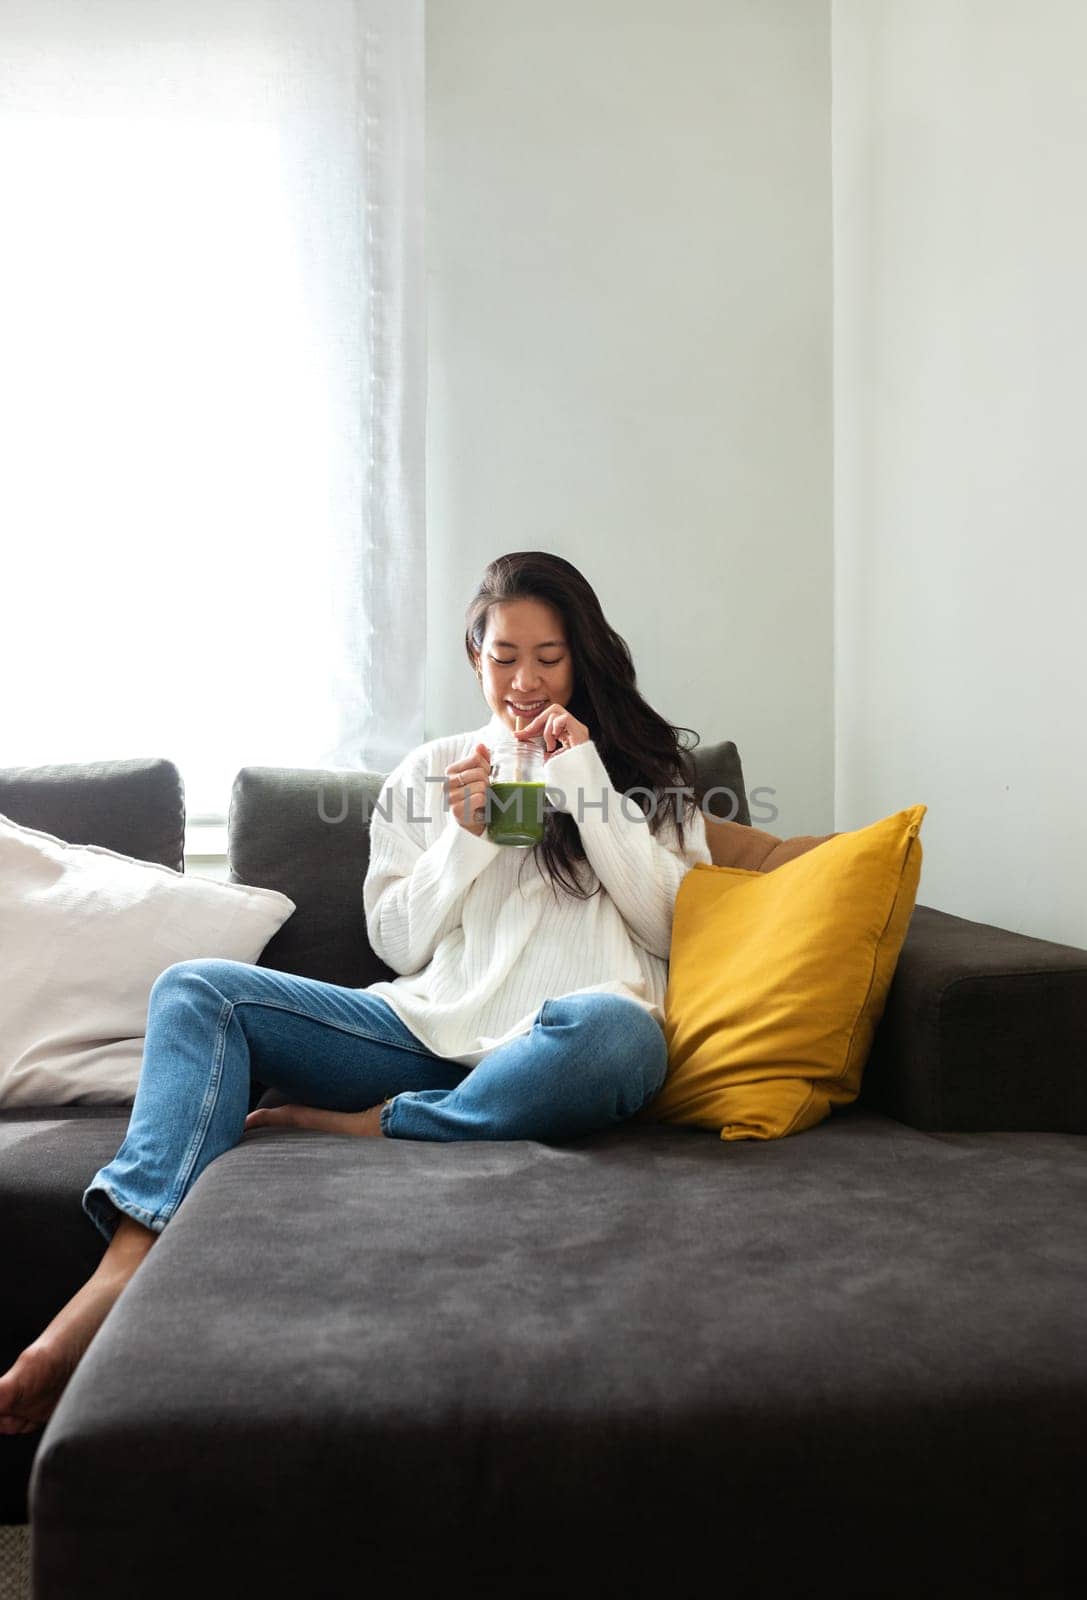 Healthy lifestyle. Young Chinese woman drinking green vegetable juice at home sitting on the sofa. Vertical image. Healthy eating and lifestyle concepts.